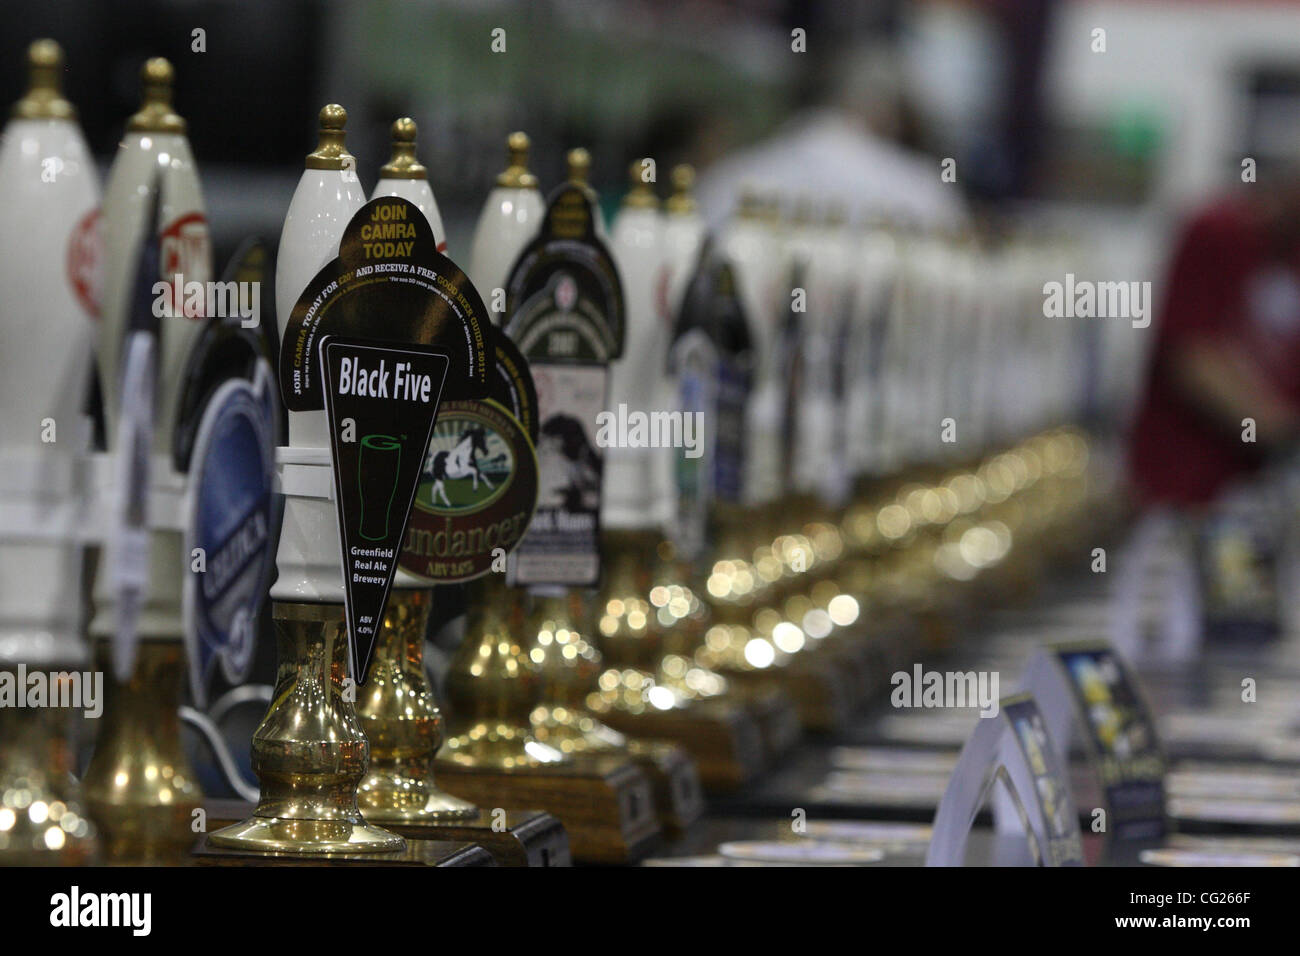 Aug. 2, 2011 - London, United Kingdom - Britain's biggest 5-day Beer Festival organised by The Campaign For Real Ale (CAMRA) kicks off at London's Earls Court with over 1000 different beers on show. (Credit Image: © Theodore Liasi/ZUMAPRESS.com) Stock Photo